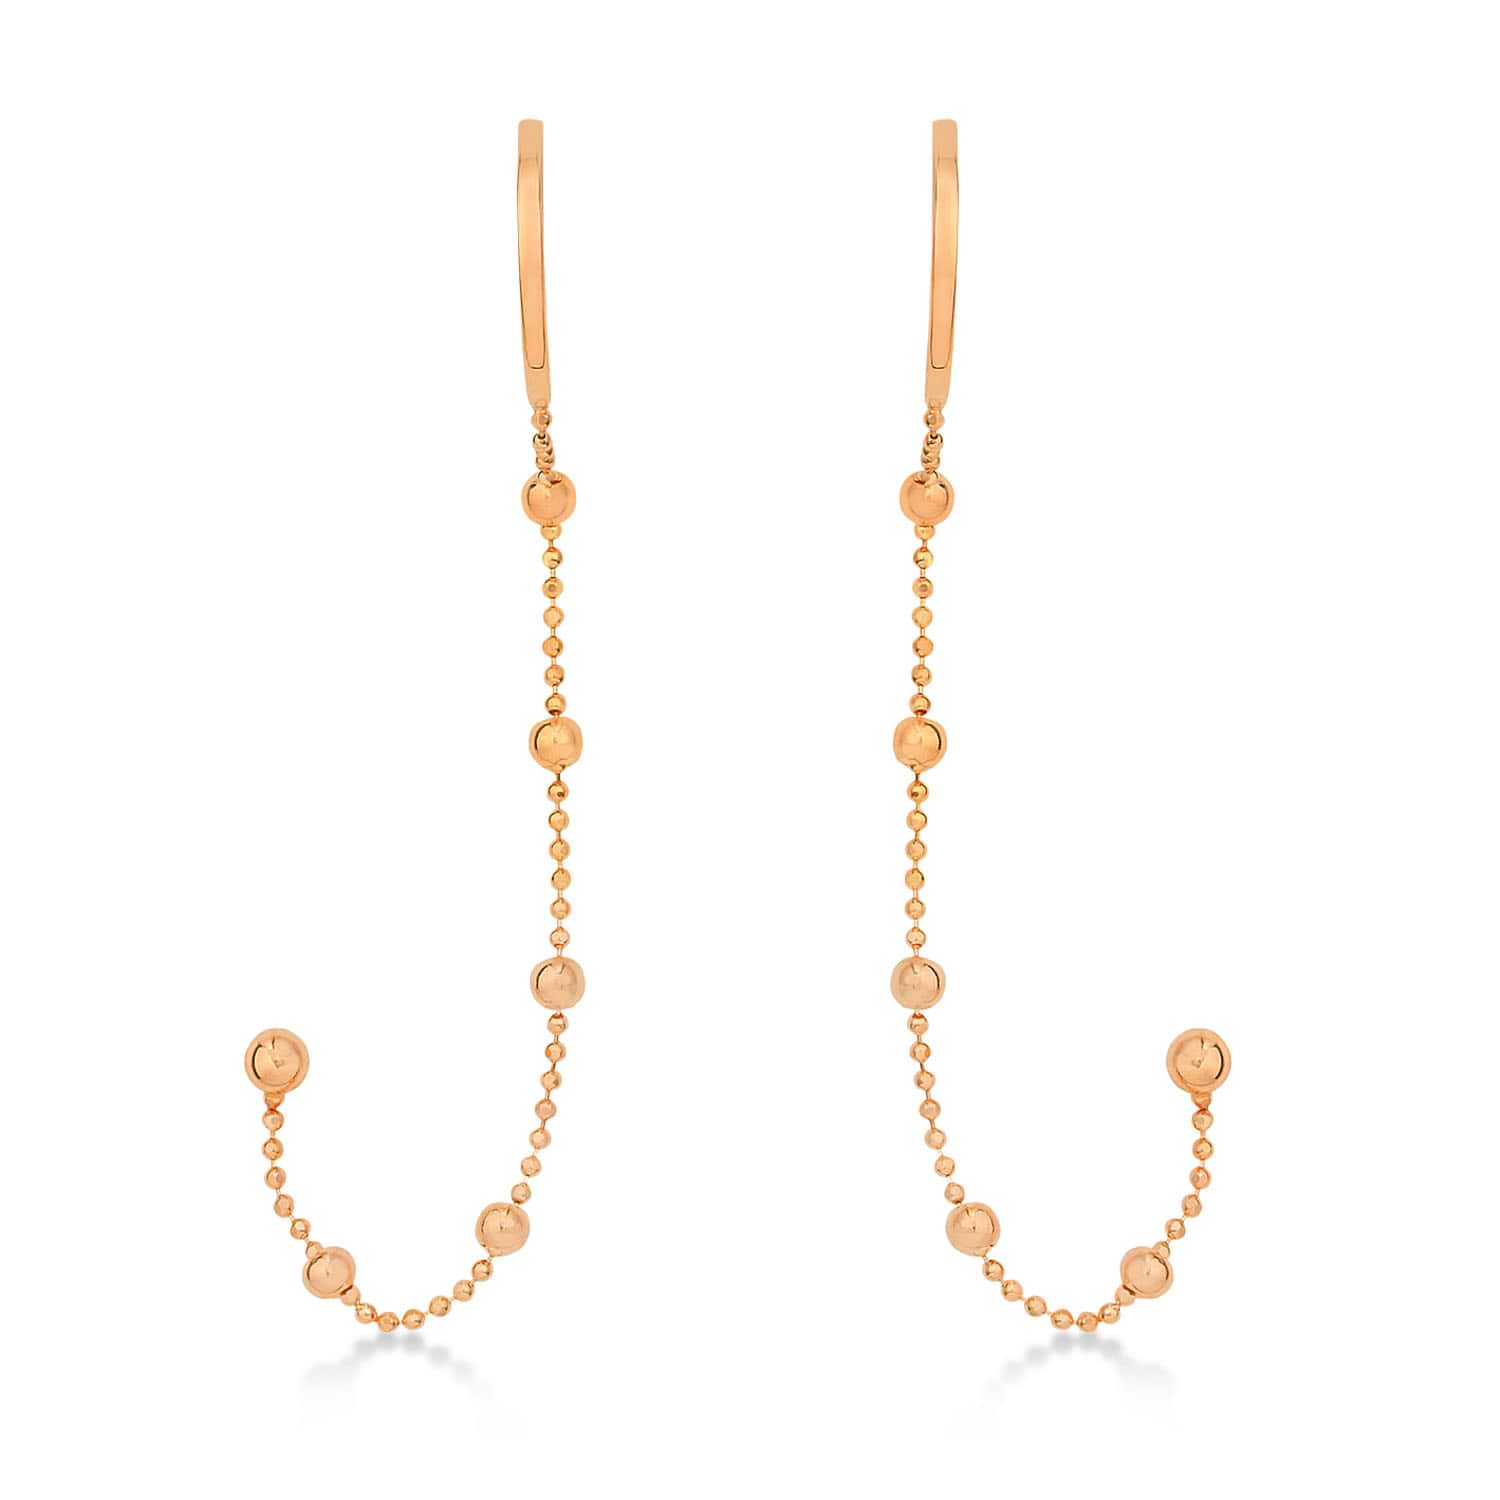 Beaded Dangling Earrings With Cuff 14k Rose Gold